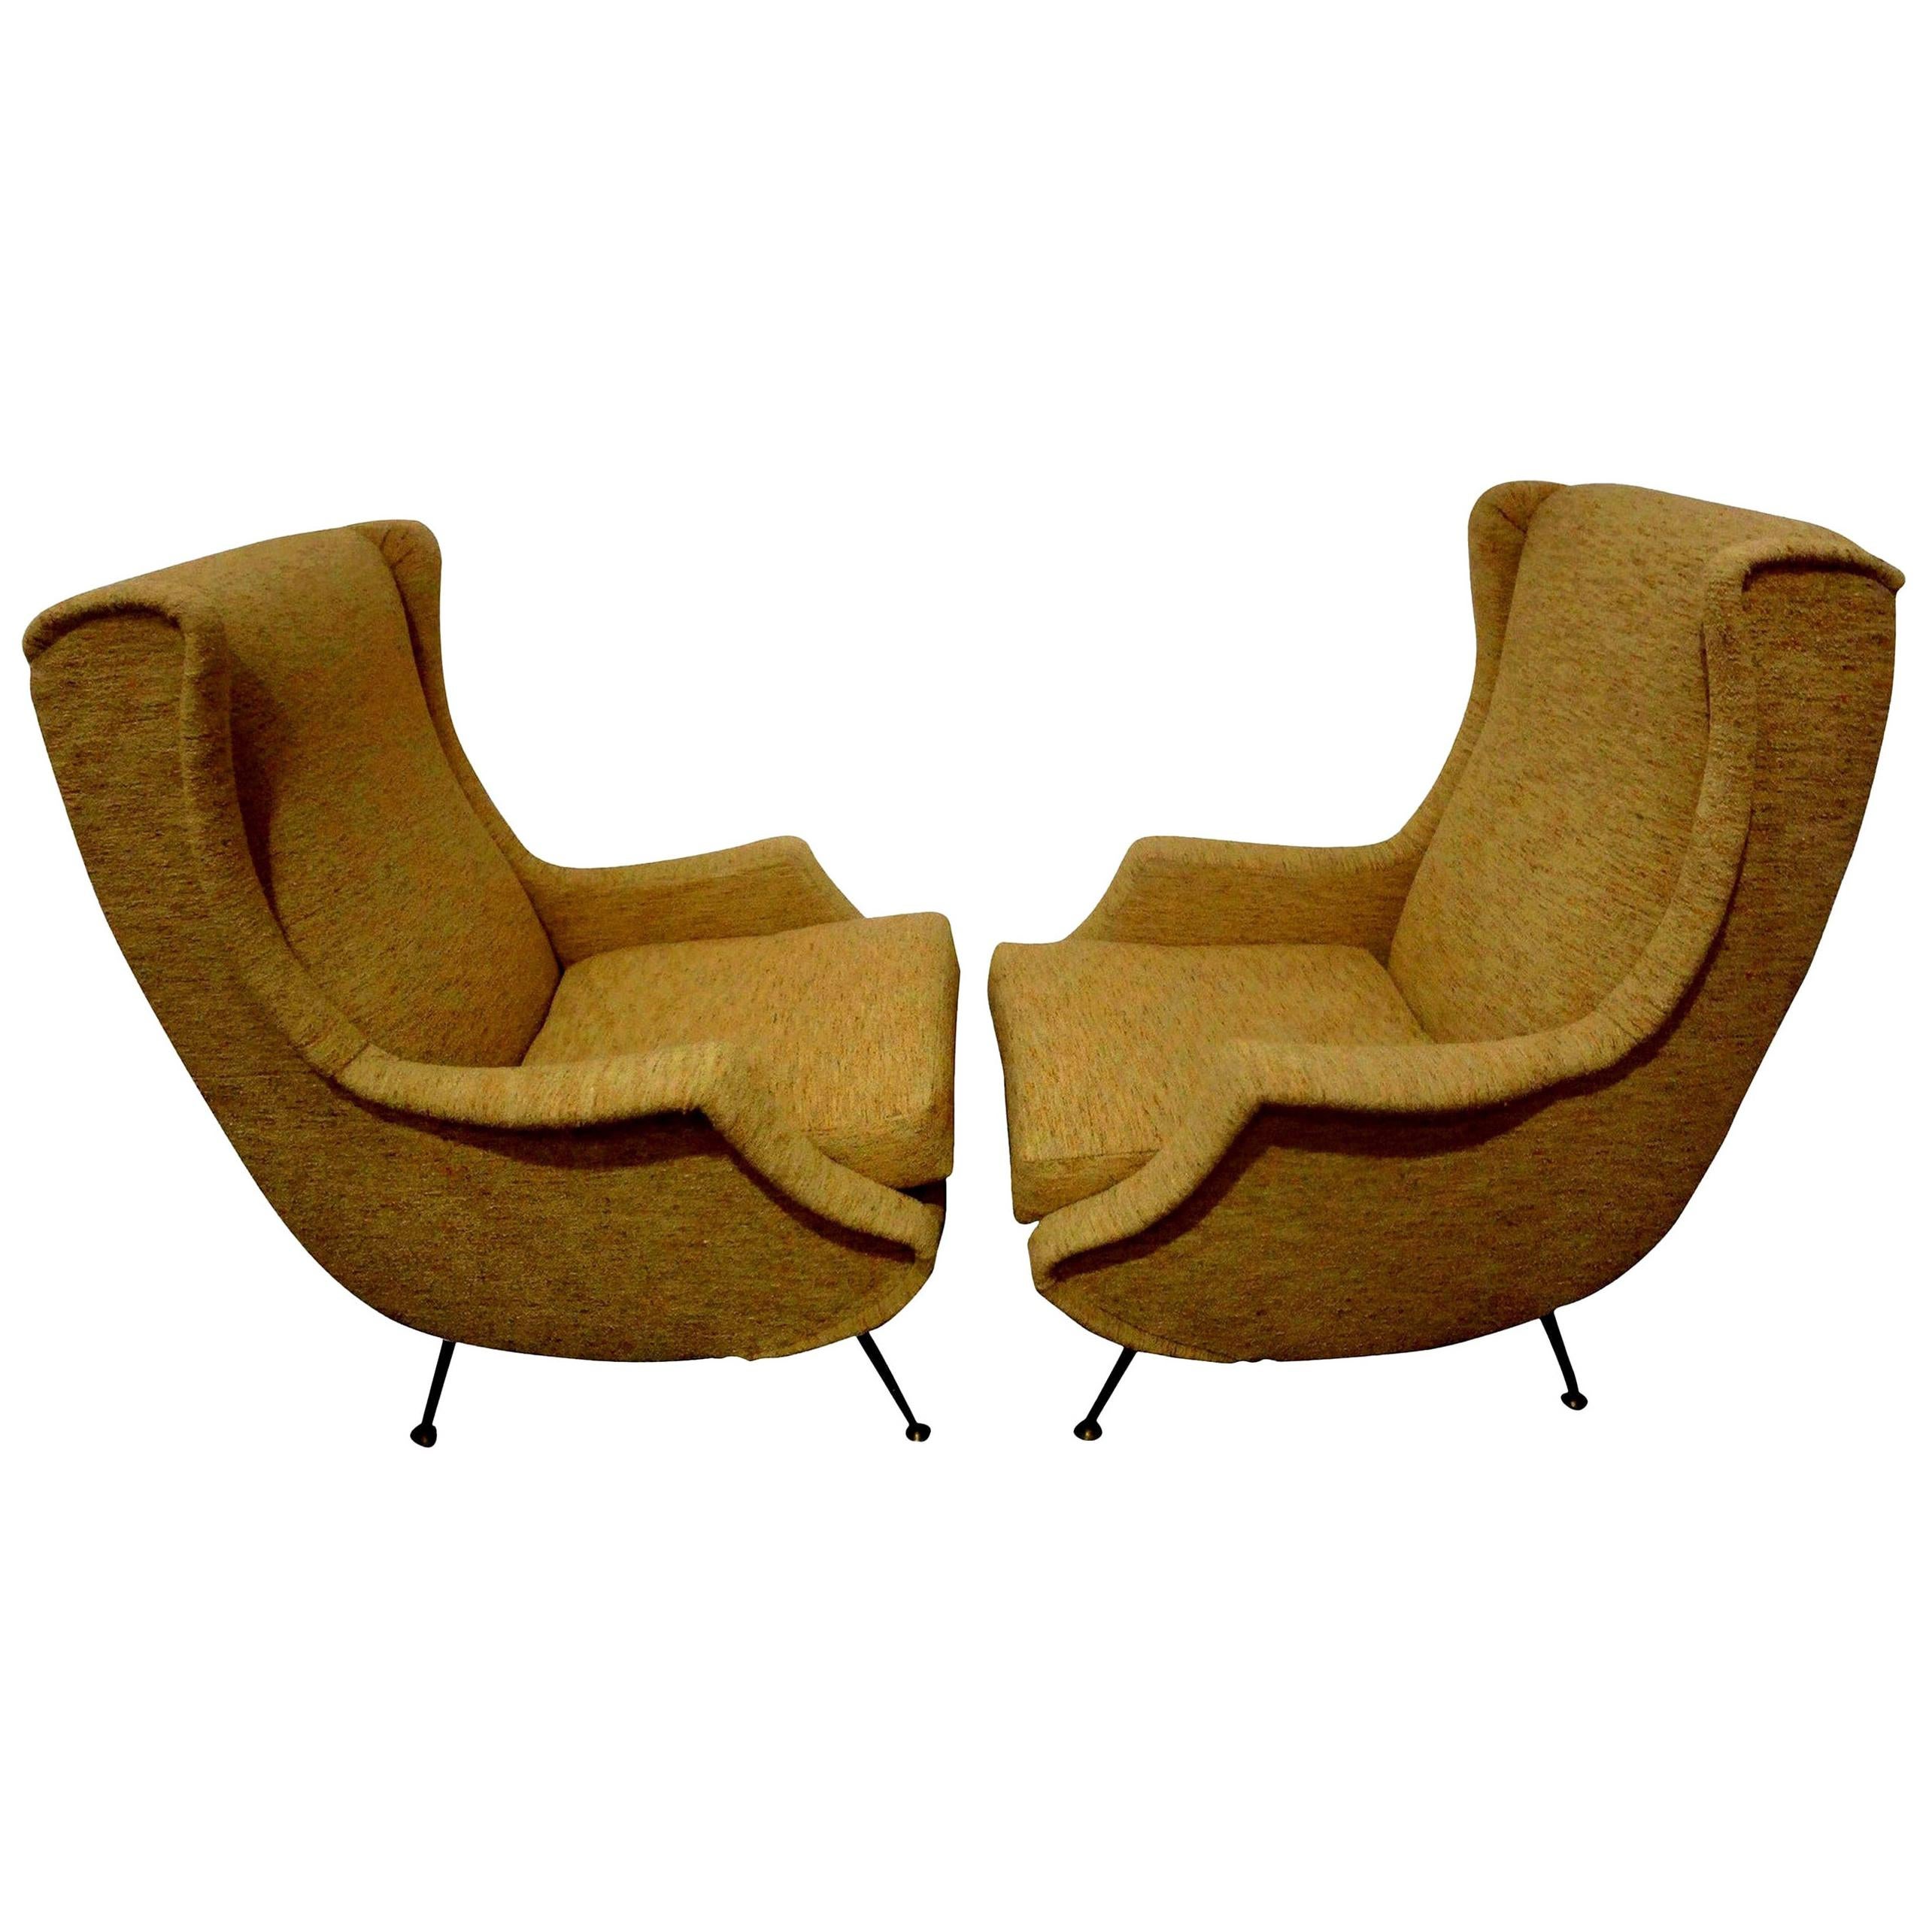 Pair of Italian mid-century lounge chairs inspired by Gio Ponti. Sculptural and comfortable pair of Italian modern lounge chairs, club chairs, armchairs or bergeres. These Italian mid-century lounge chairs with splayed brass legs were taken down to